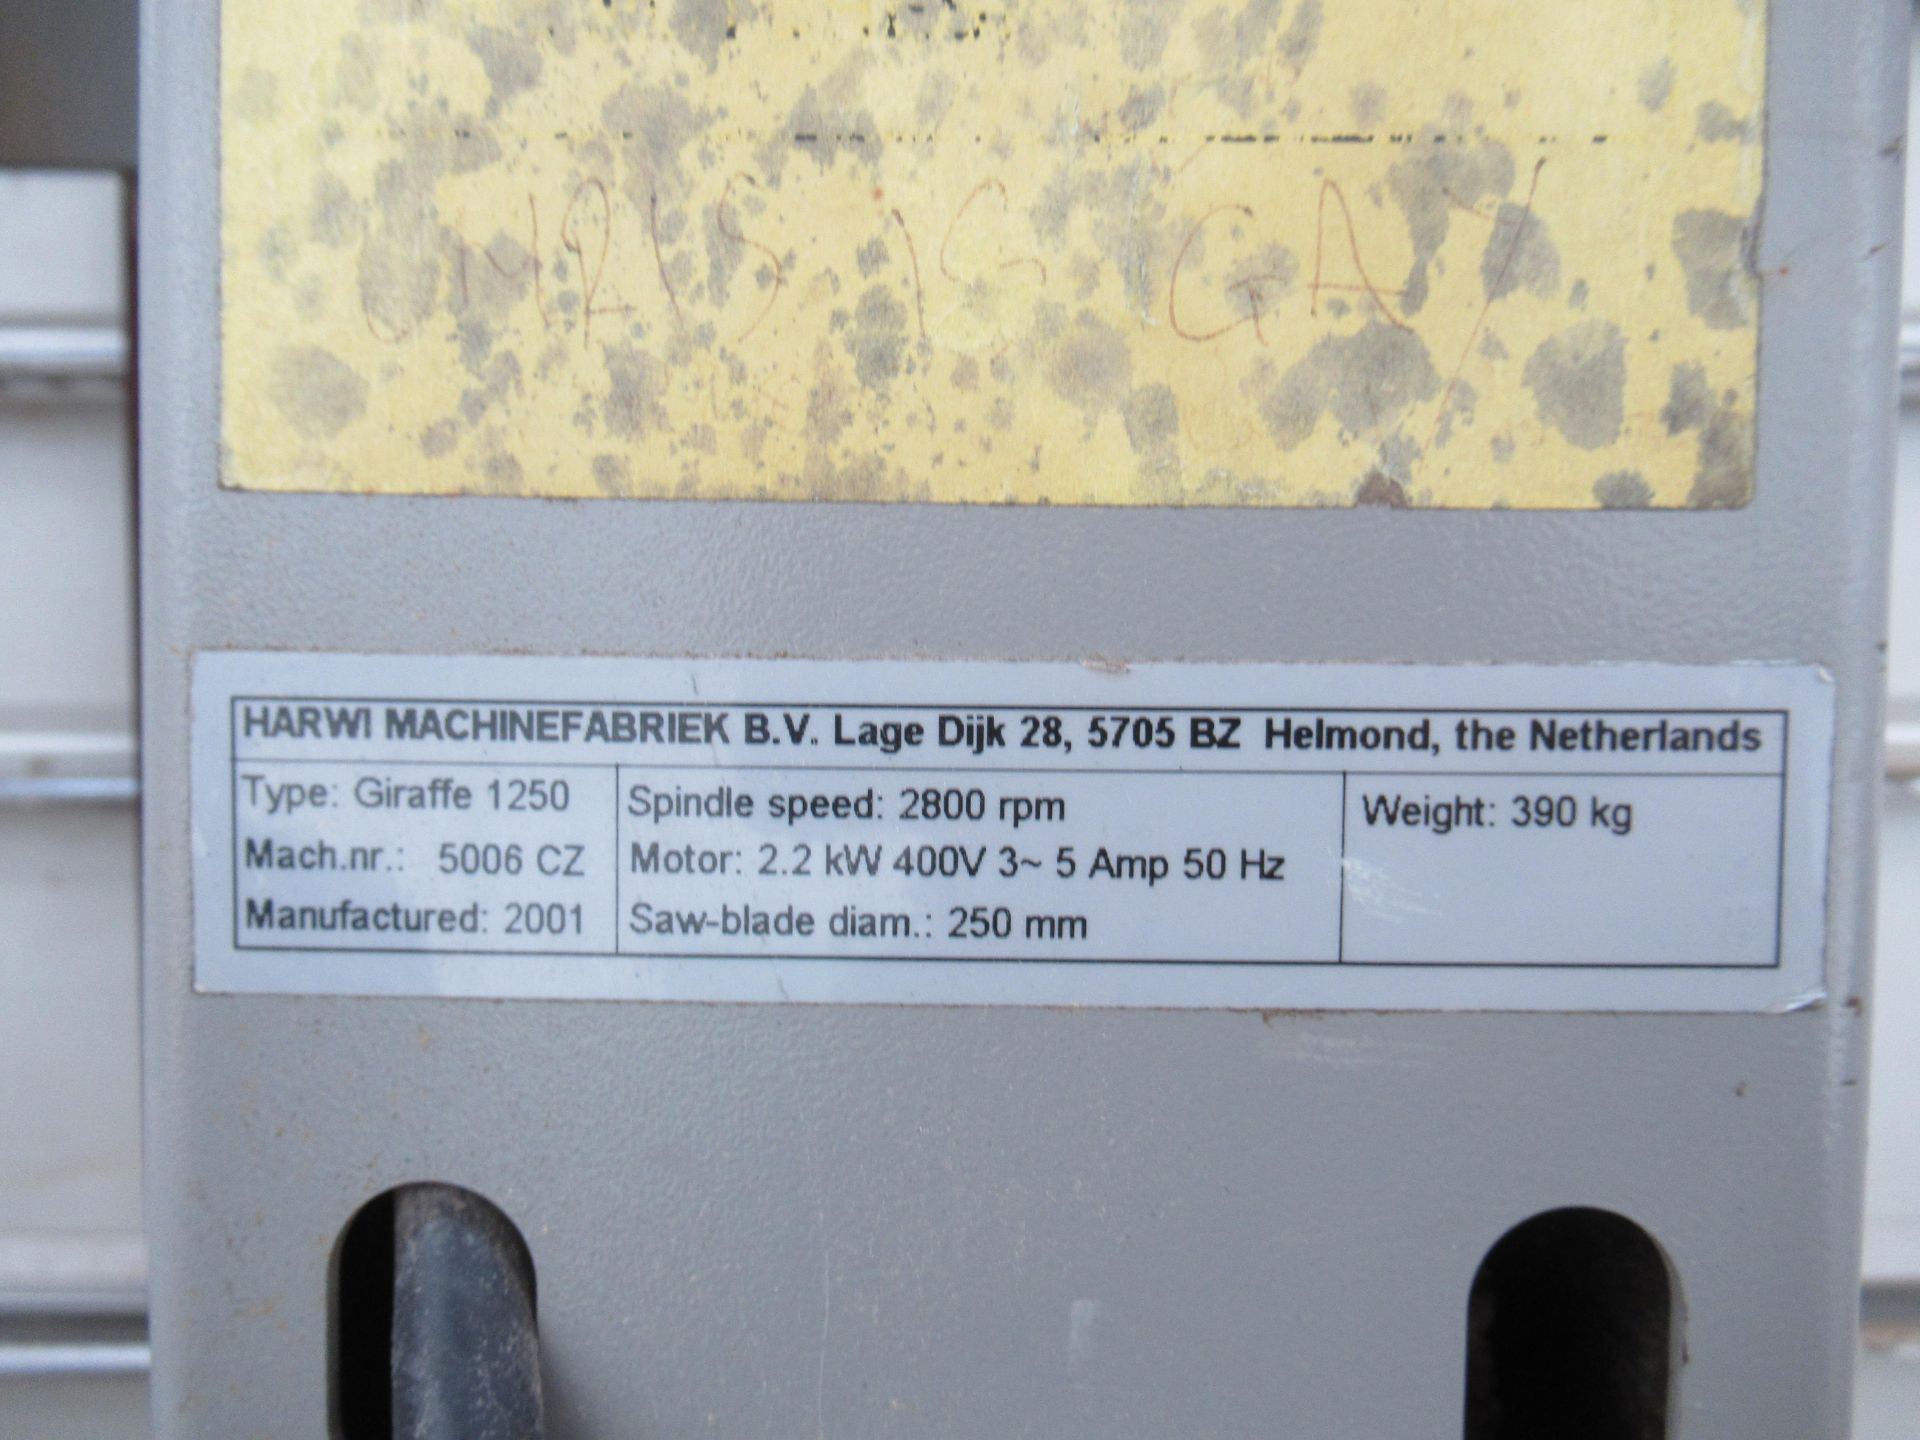 Startrite Hawri-Giraffe Vertical Wall Saw Type 1250 Mach No 5006CZ, YOM 2001, 400V. Please note ther - Image 3 of 3